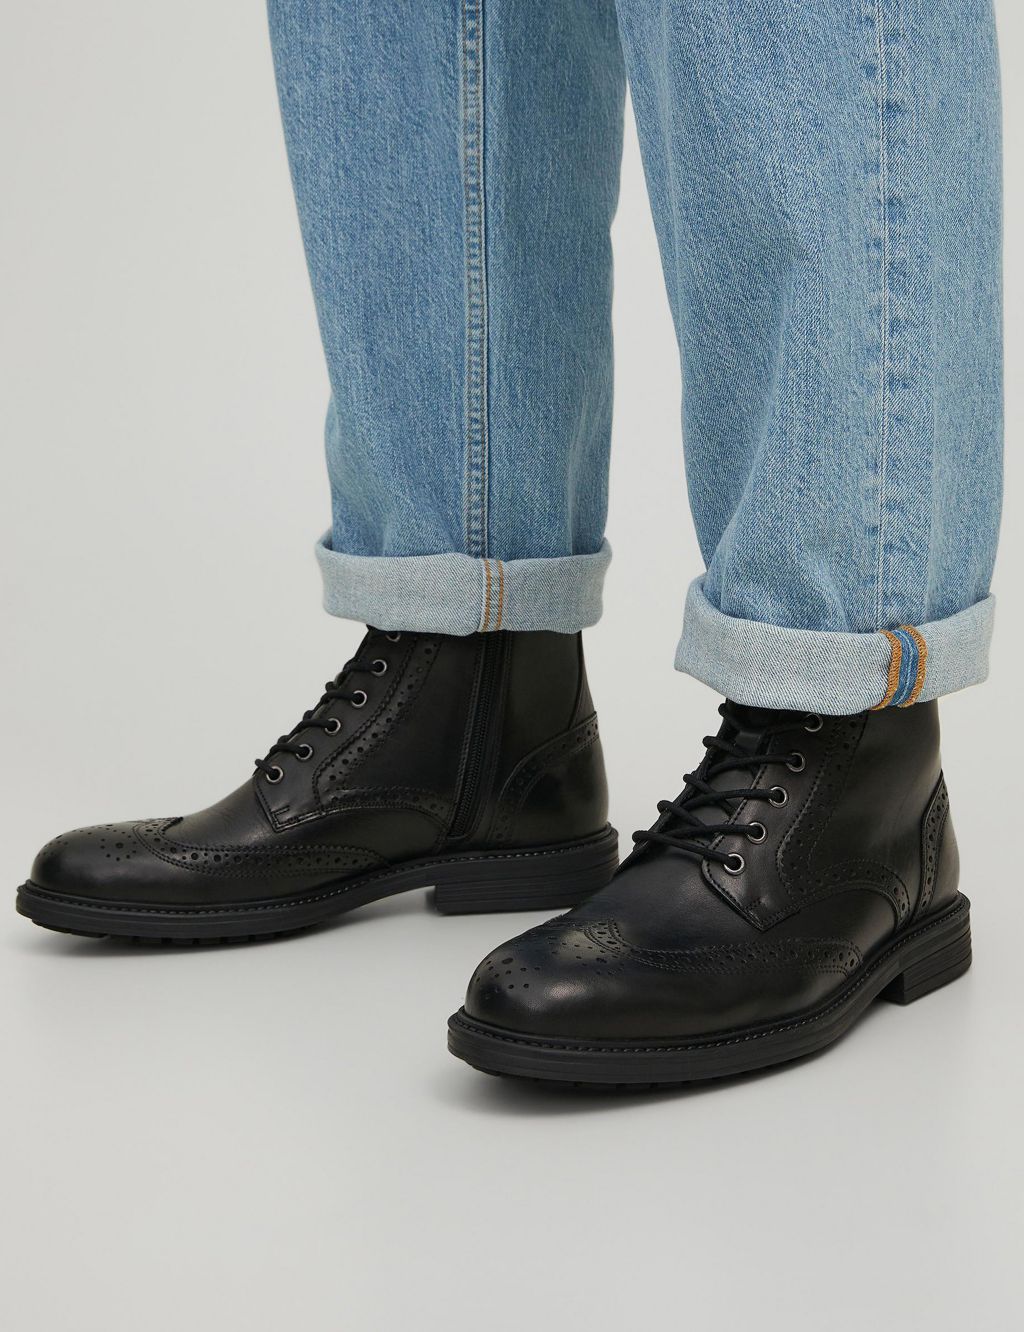 Leather Brogue Casual Boots image 7